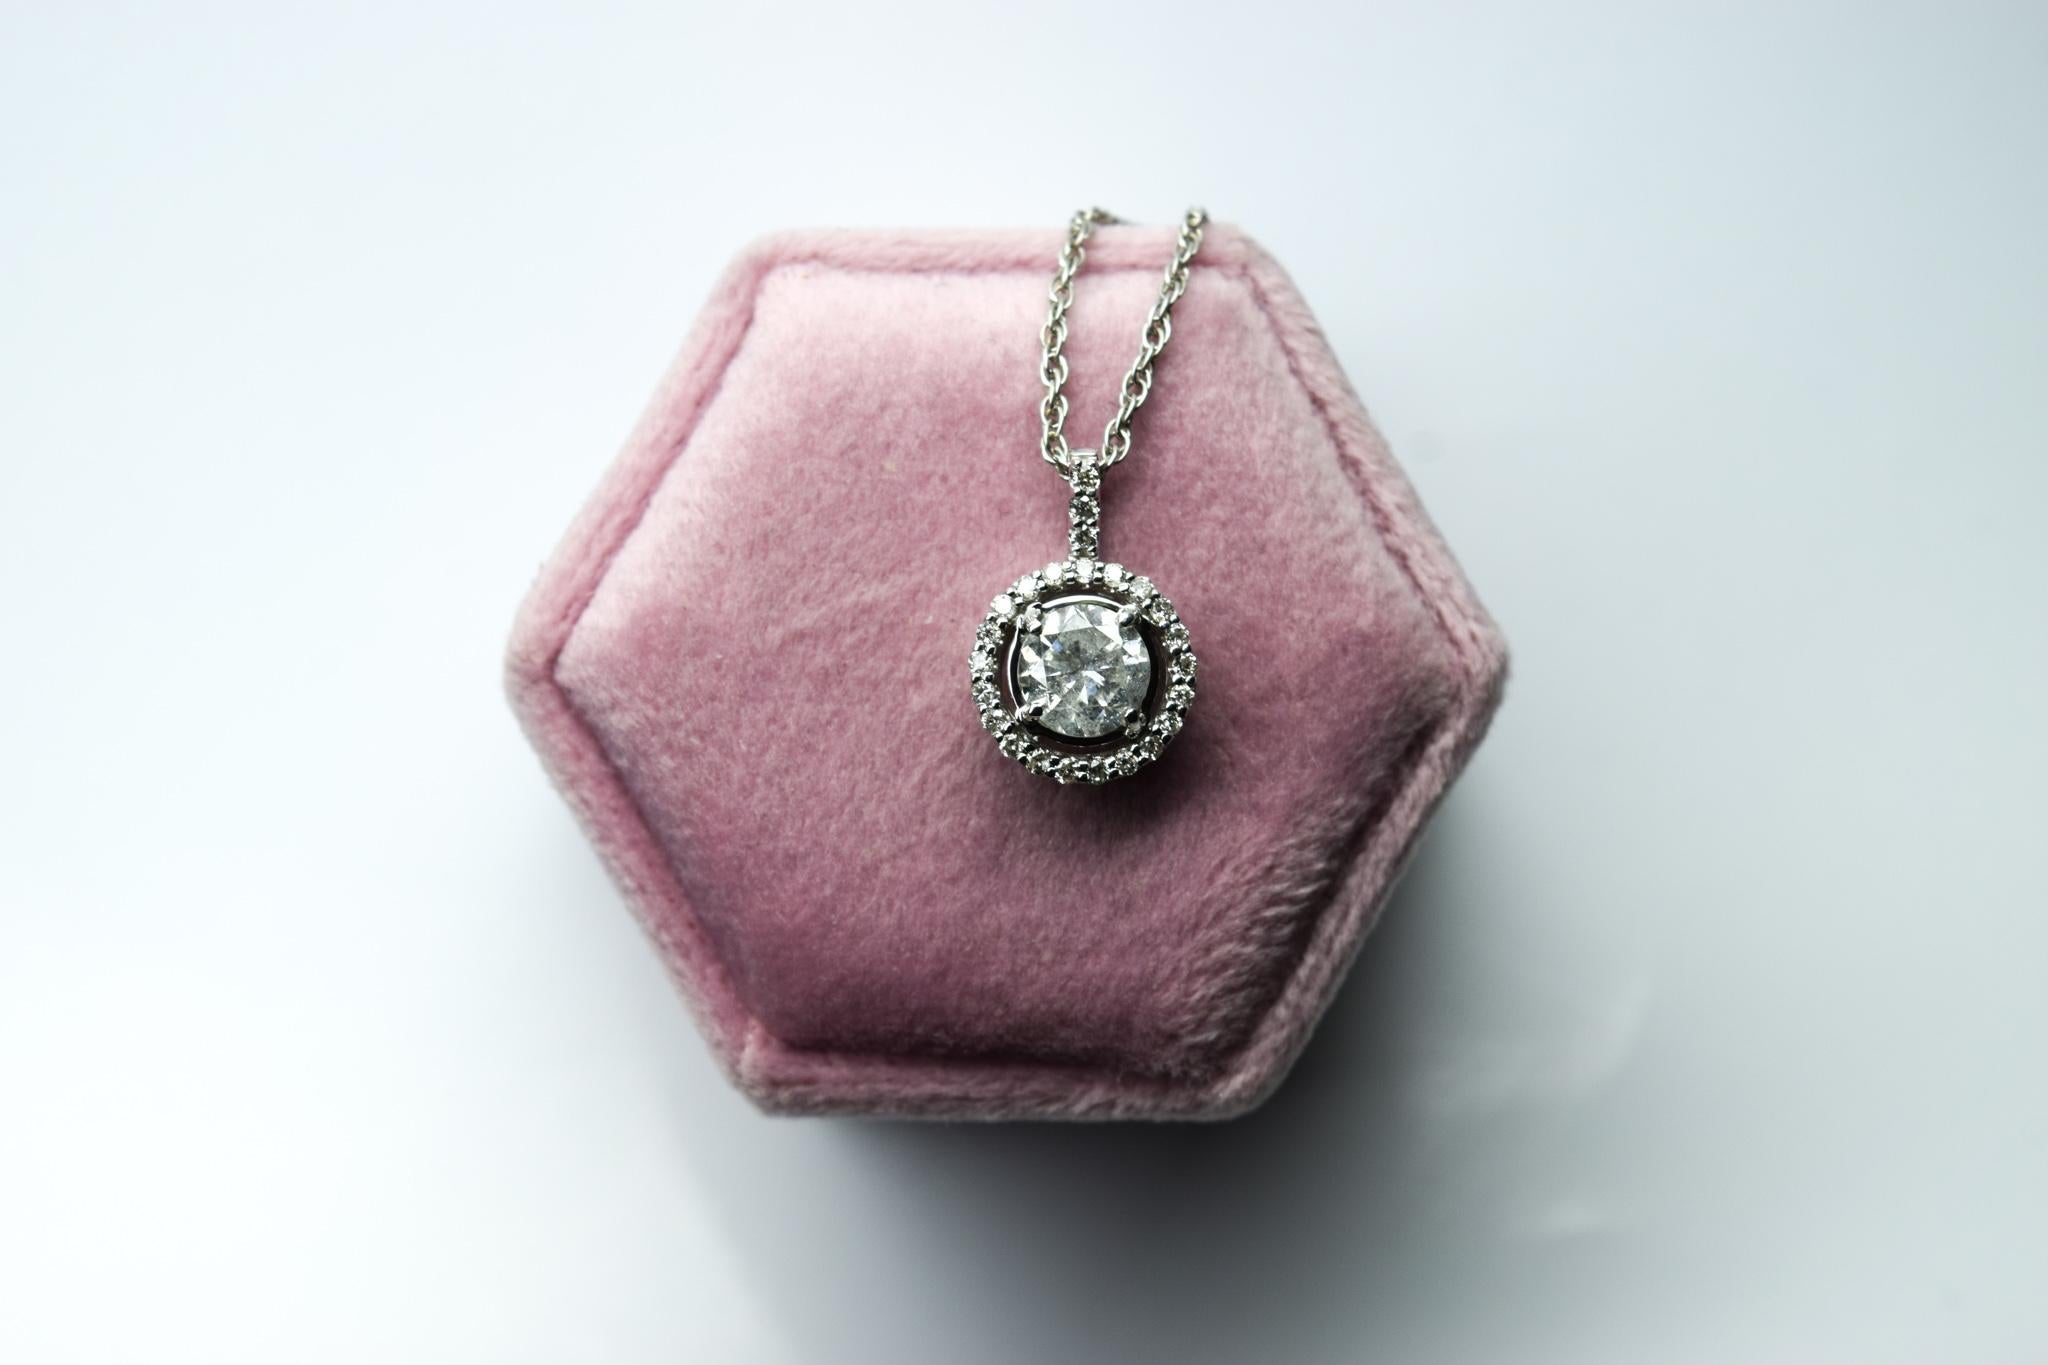 1ct center diamond I1 clarity and G color made with halo of diamonds SI clarity and G color in 14Kt white gold, the chain is 18